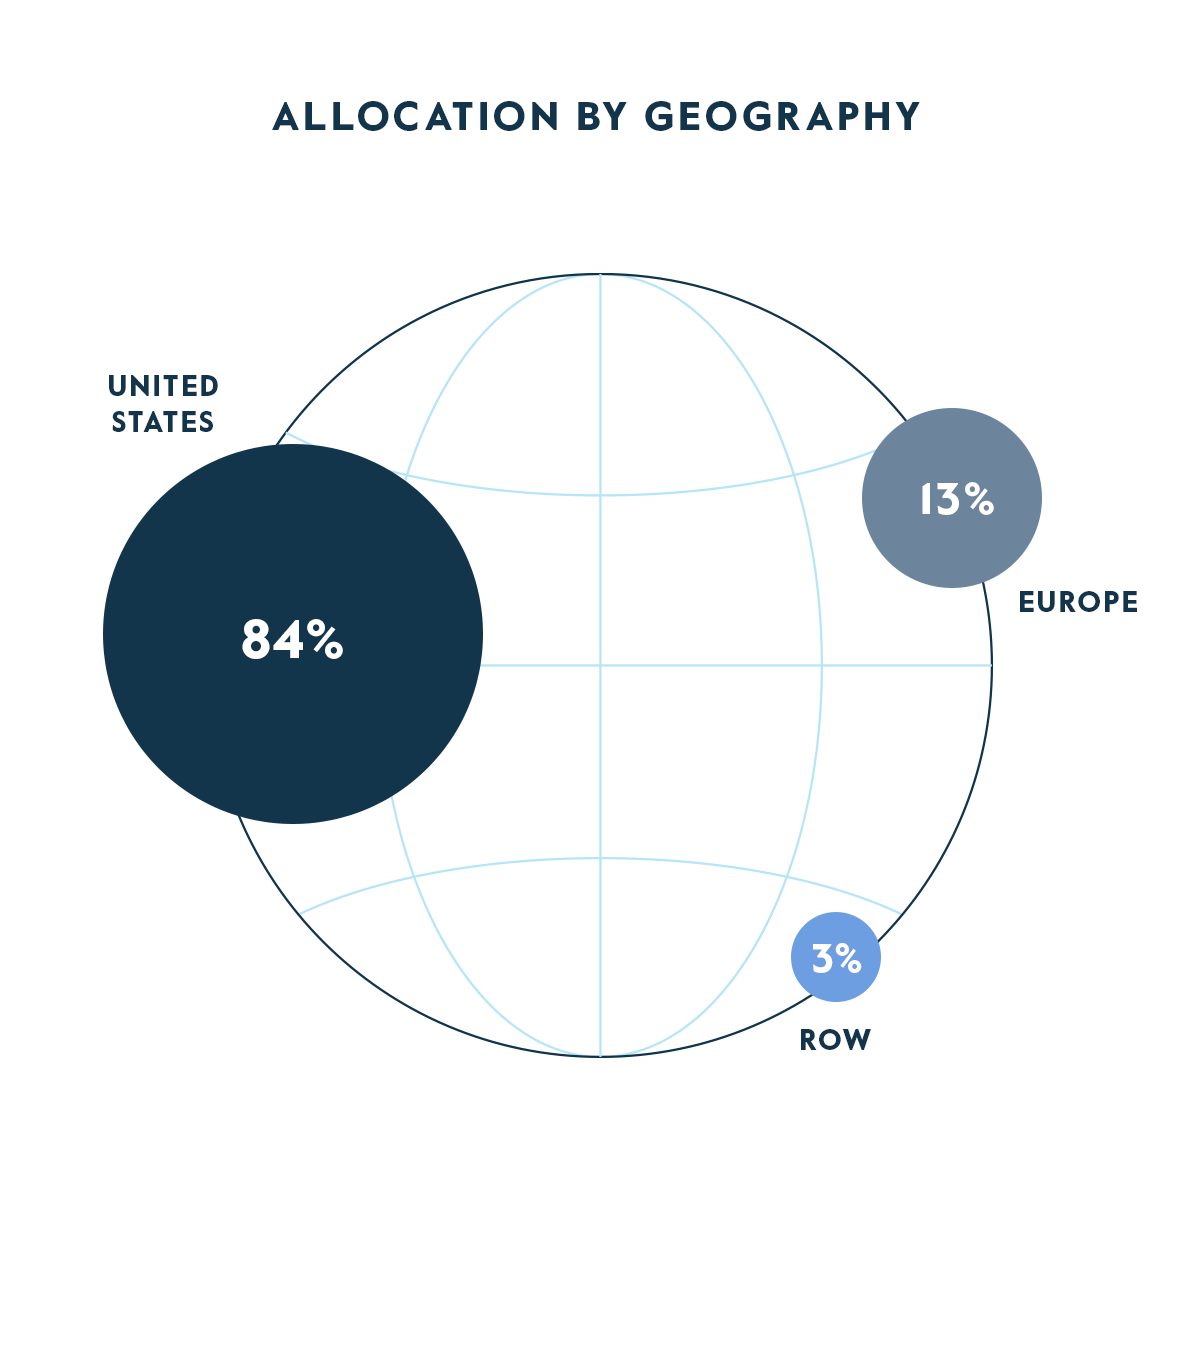 Allocation by Geography